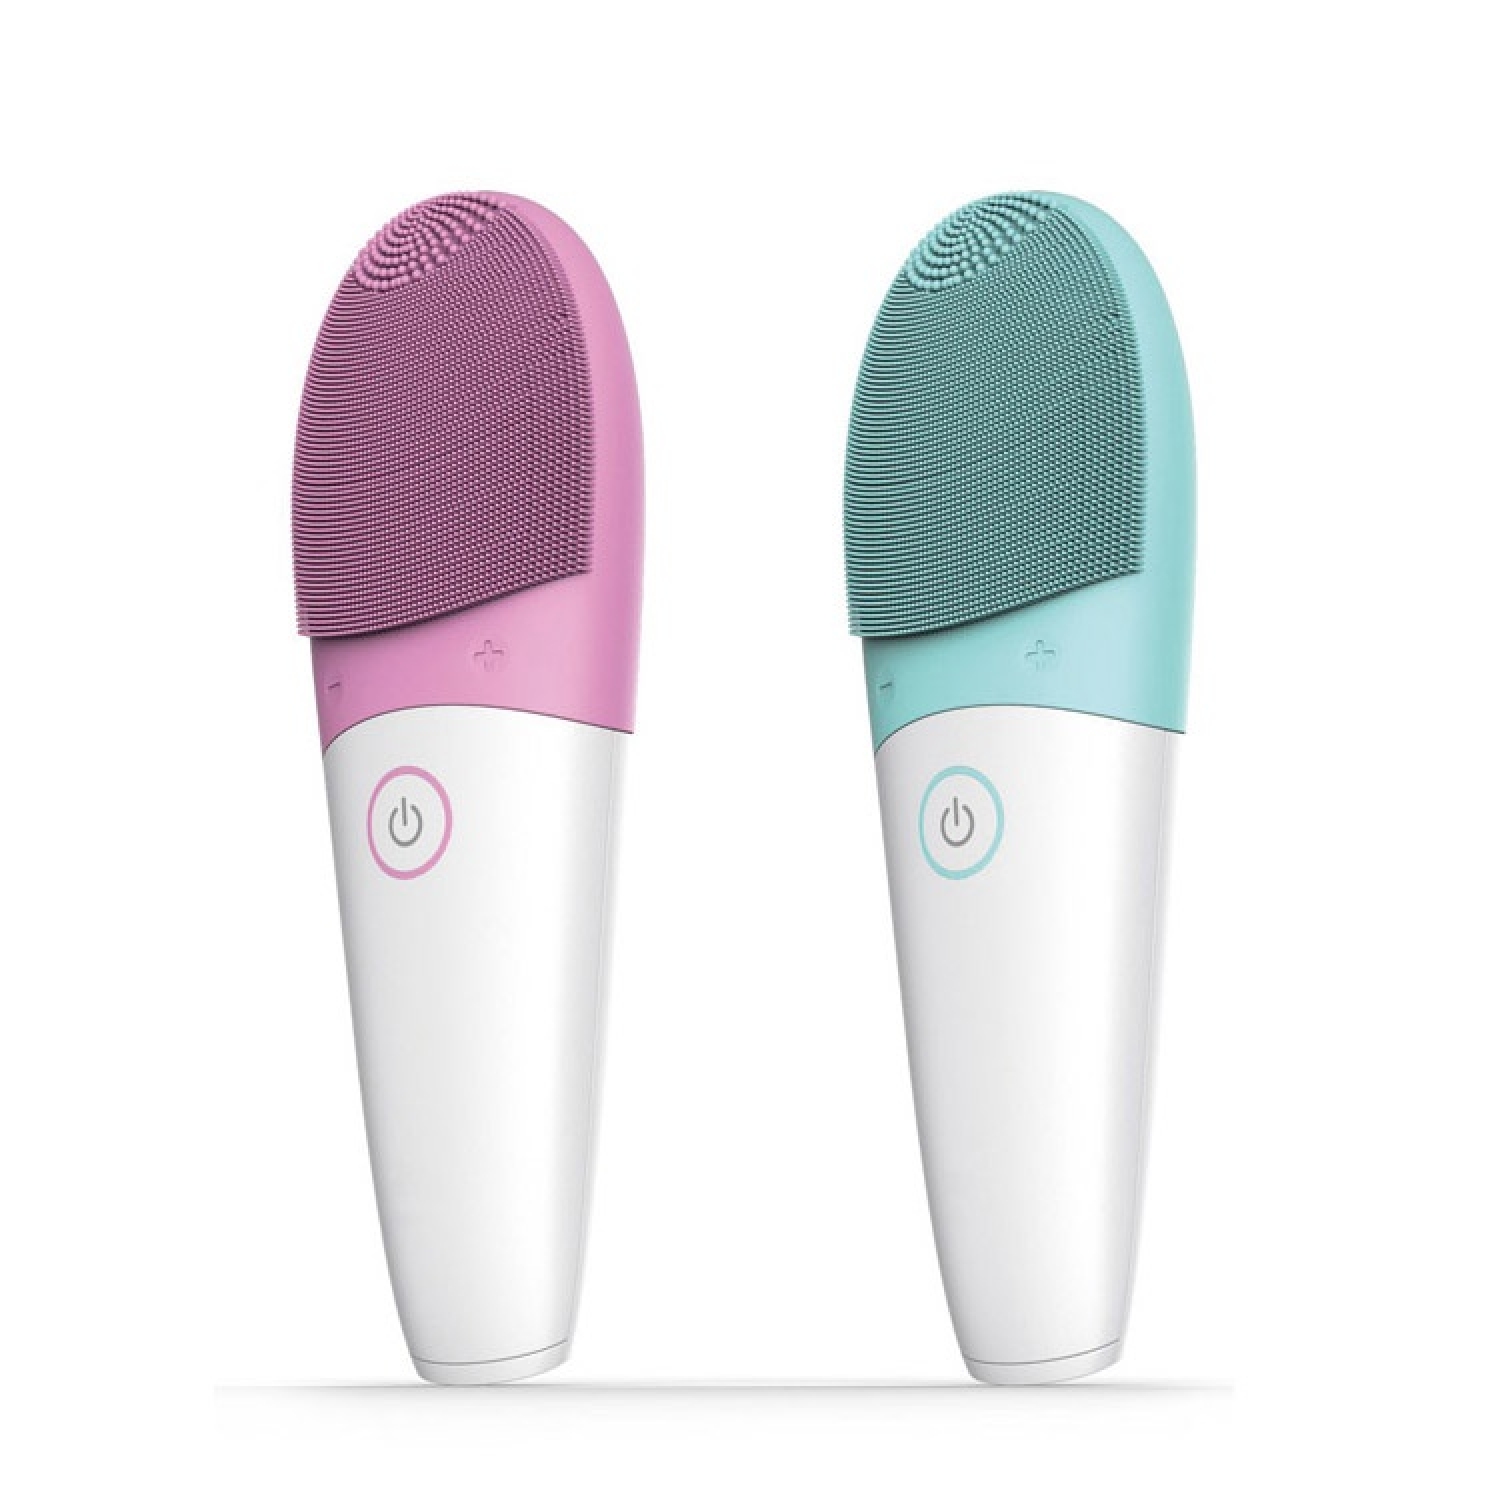 2 in 1 Silicone Facial Brush and Massager